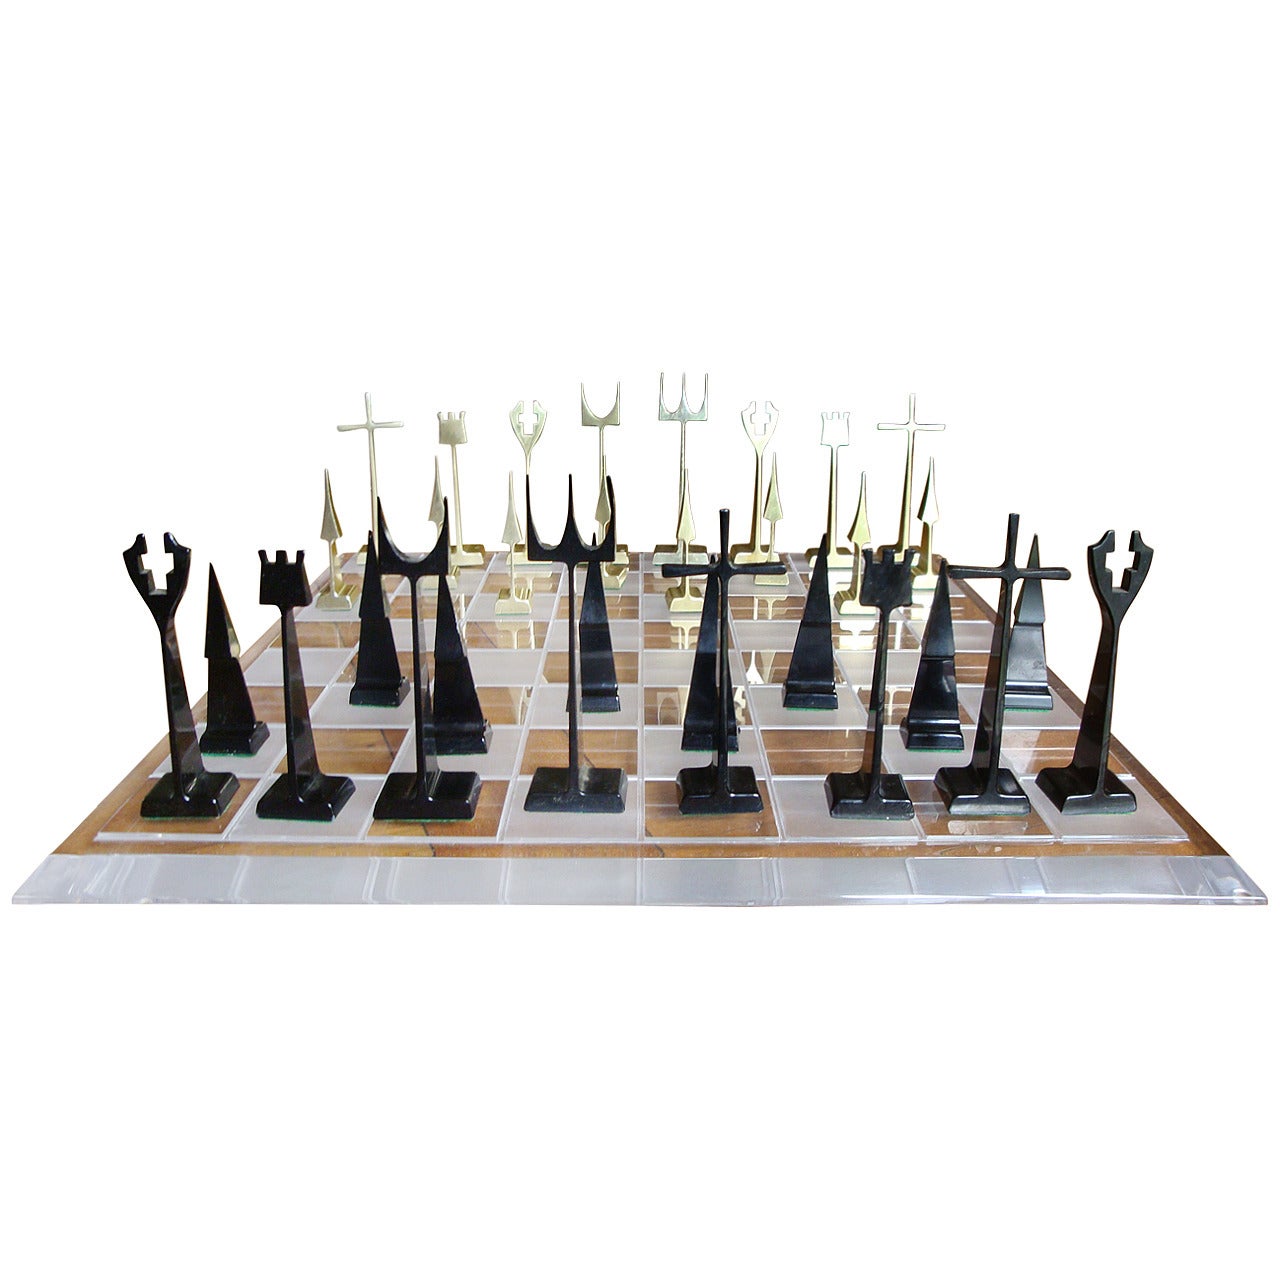 Austin Cox Chess Set and Lucite Board